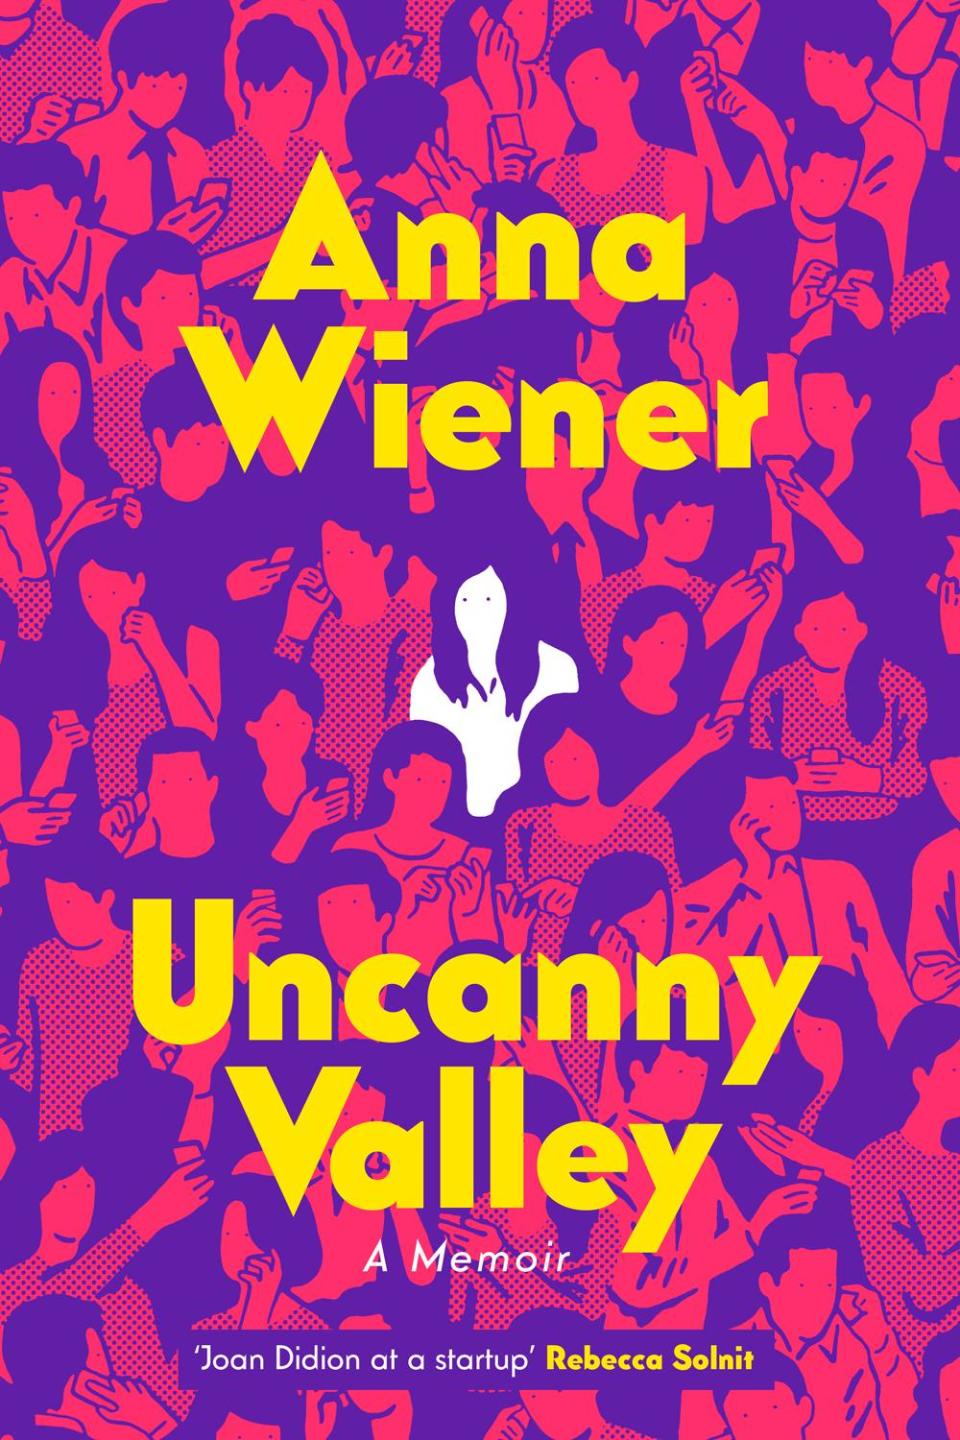 Uncanny Valley: A Memoir of life in Silicon Valley is out now